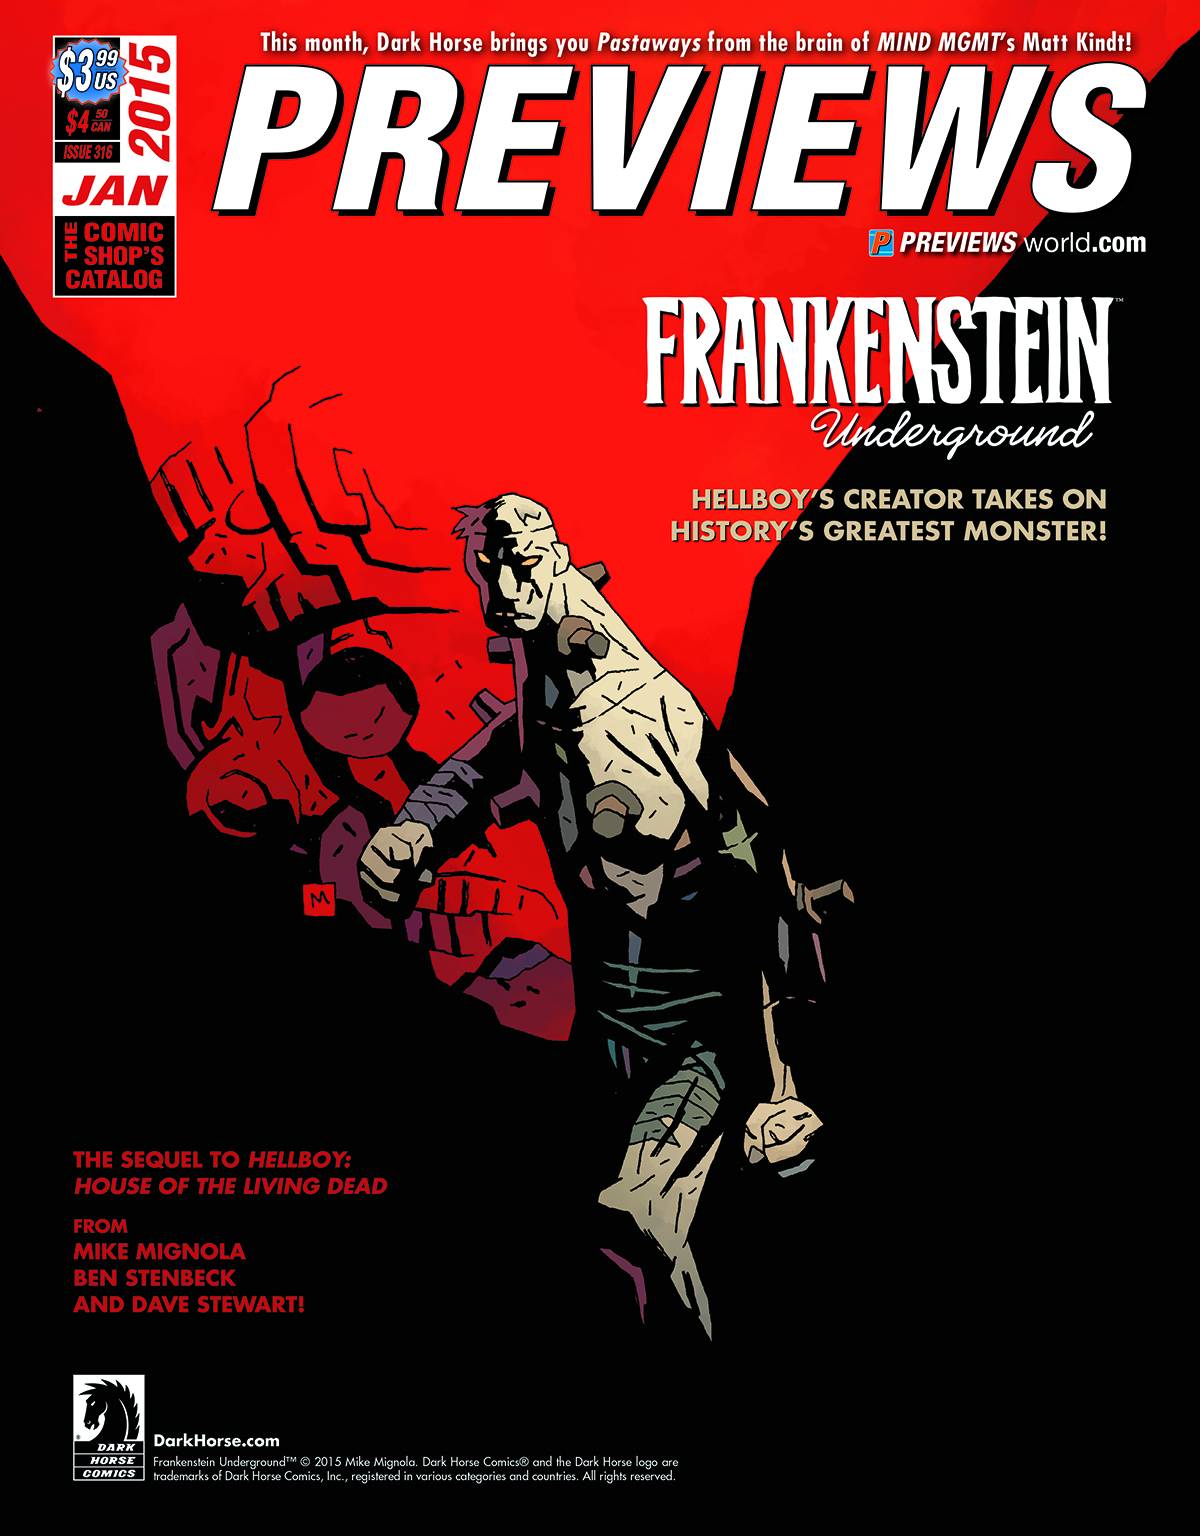 Previews #318 March 2015 #1711